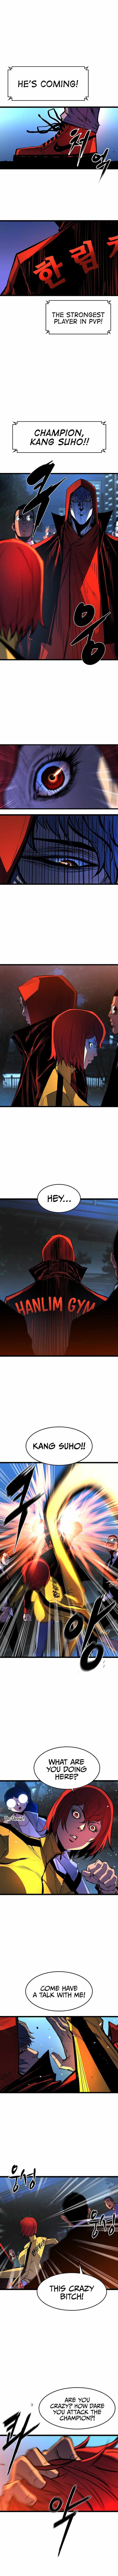 Hanlim Gym Chapter 87 page 7